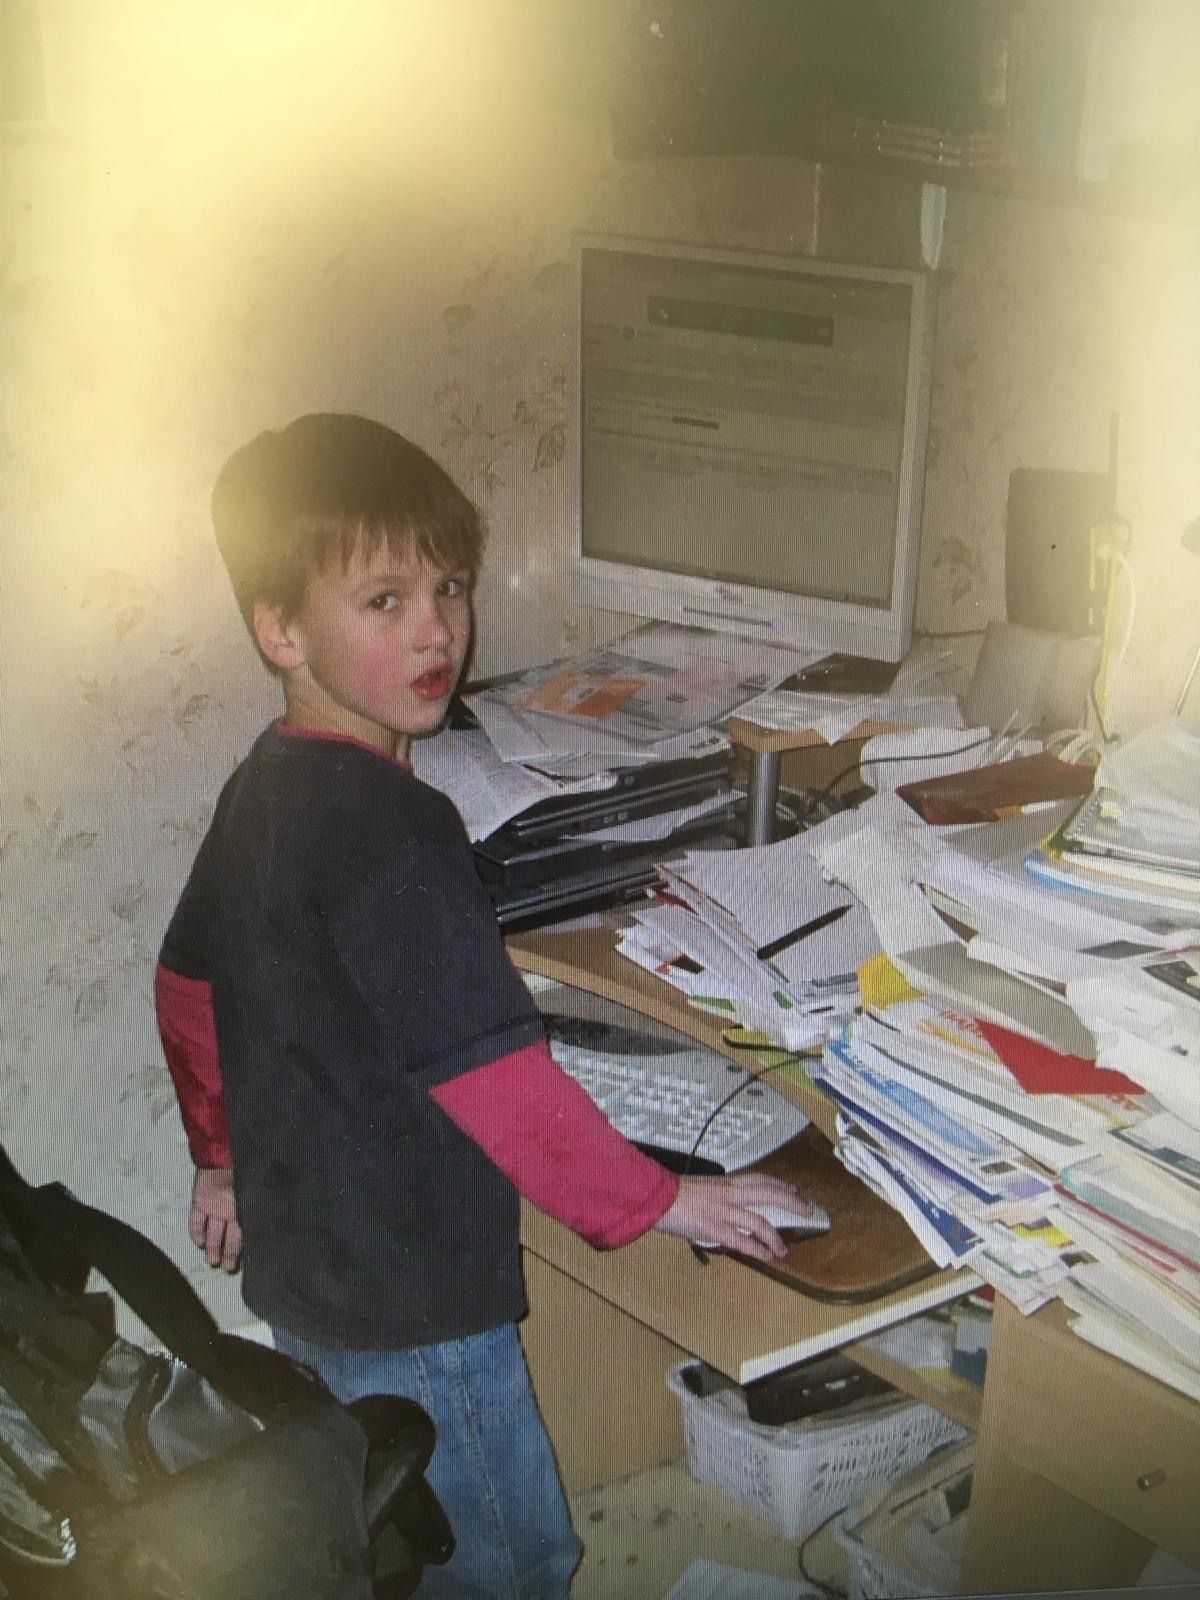 Old photo from 2010 of the author of the site pictured as a child browsing the computer with a messy desk.